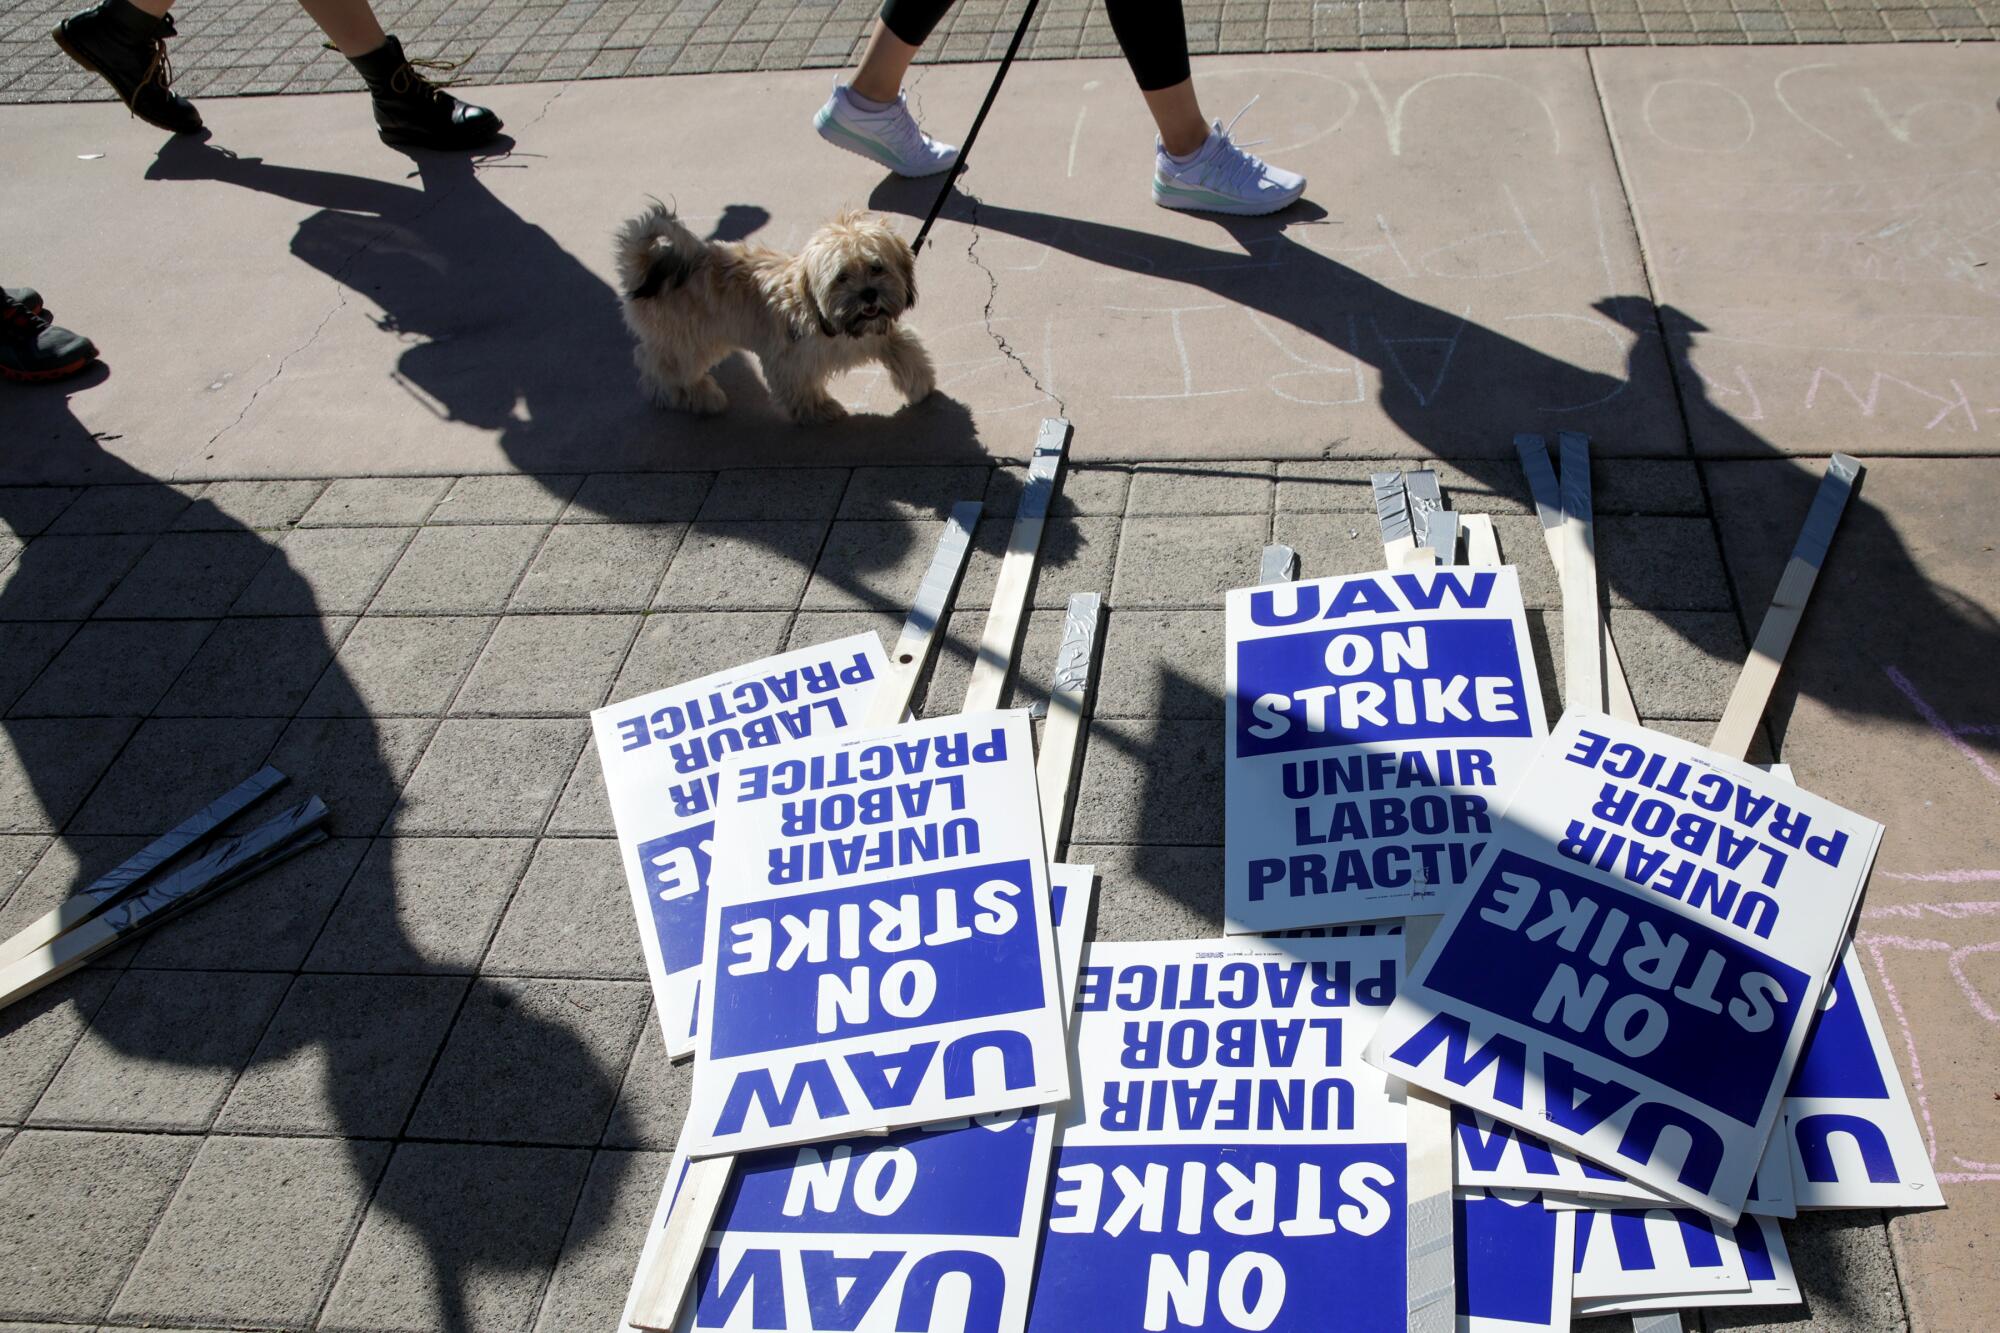 A view of the pavement where a small dog walks past a small pile of signs that read "UAW On Strike"